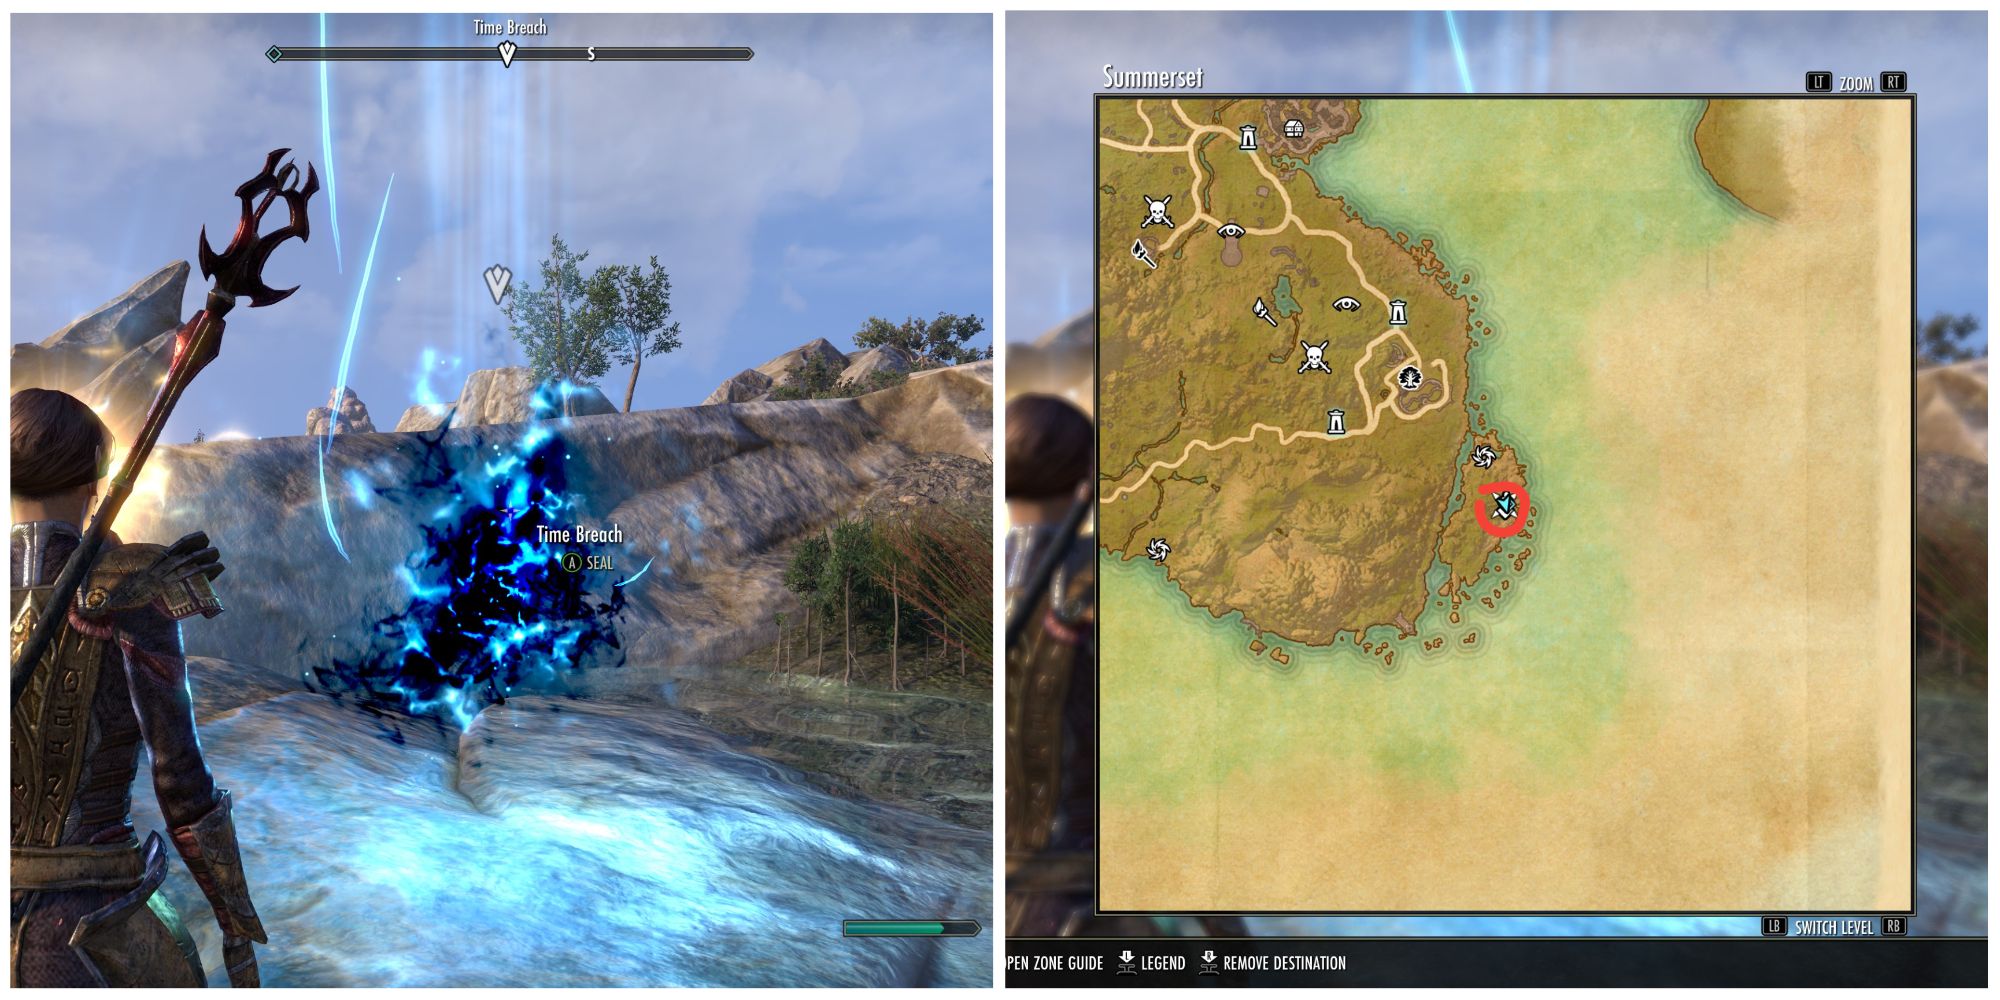 Eighth time breach location in Summerset